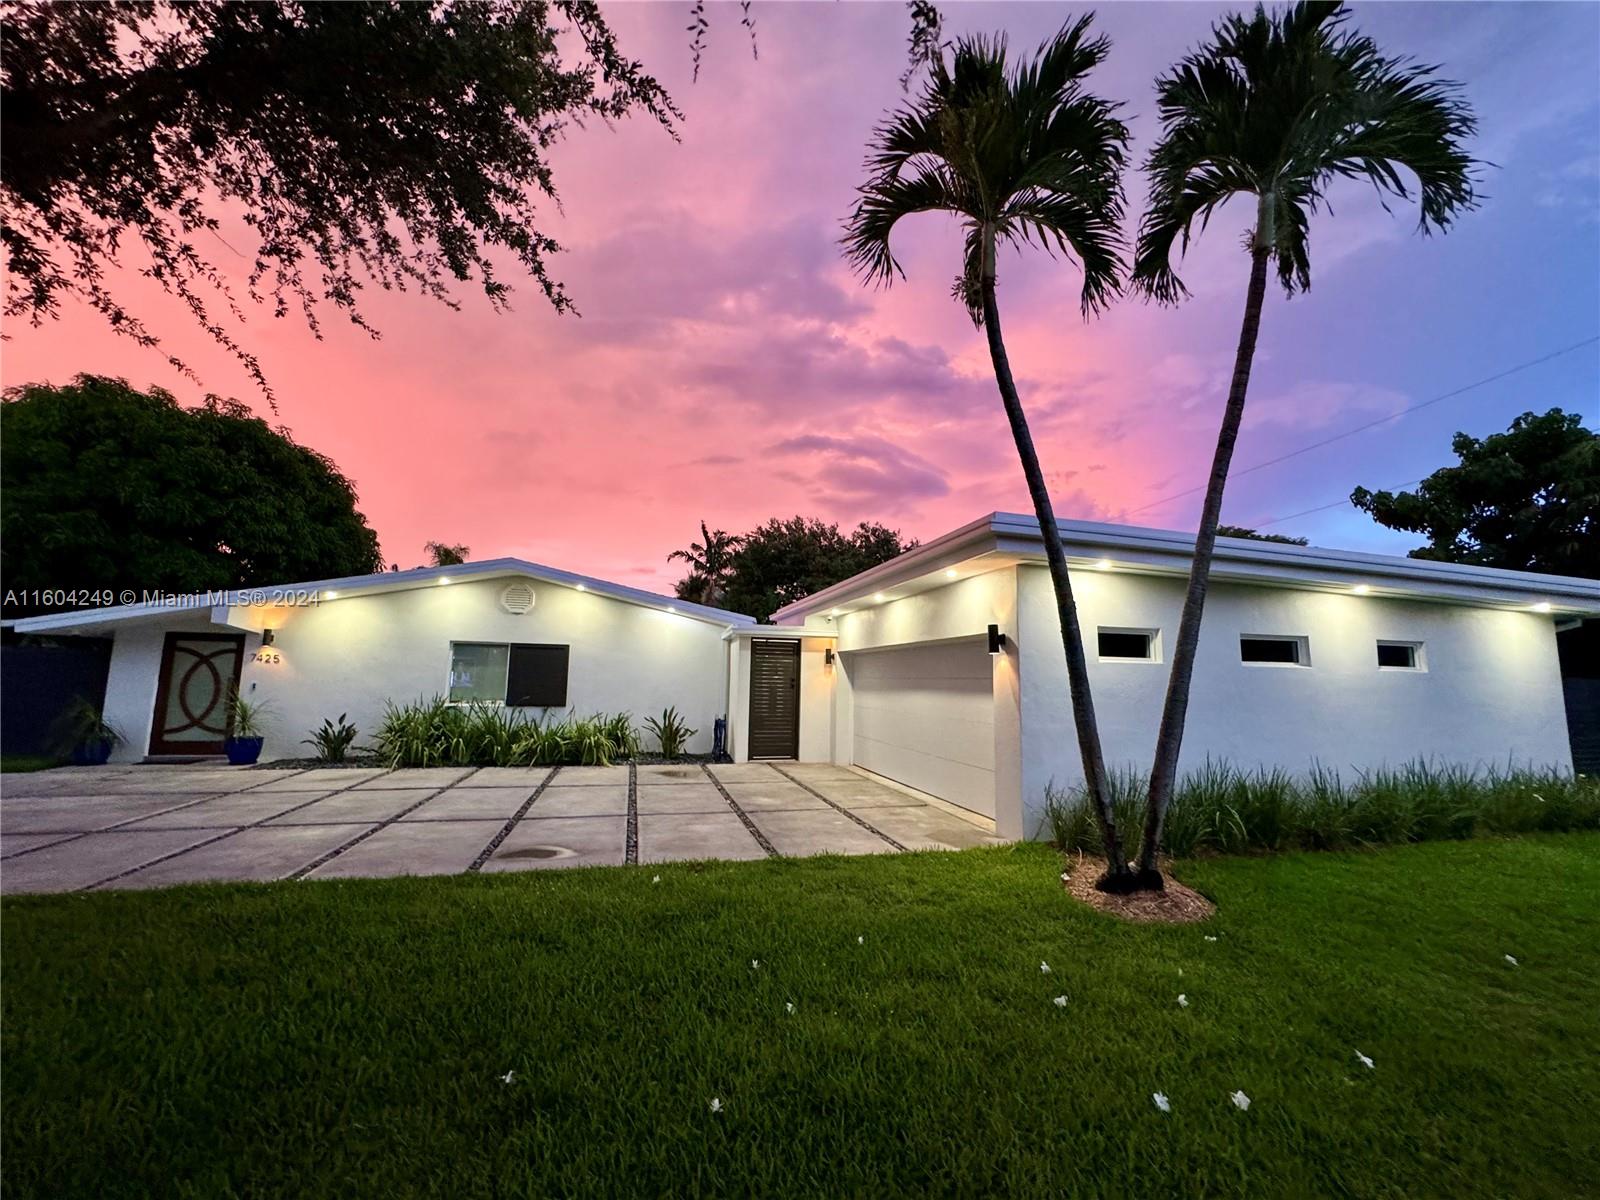 Completely remodeled in 2022 home in Palmetto Bay.  The South Florida lifestyle at its finest.  Main house is 3 bedrooms, 3 bathrooms.  Open floor plan.  Foyer entry leads to living area and kitchen overlooking the pool area.  A unique feature is the detached Cabana. The completely remodeled 1 bedroom, 1 bathroom Cabana, boasts a full kitchen, full size bathroom and full-size washer and drier in laundry area. Main house and Cabana have custom wood cabinetry, quartzite countertops and stainless steel appliances.  The saltwater system pool is surrounded by a summer kitchen and pergola.  This home is wired throughout with security cameras and up-to-date technology.  The opportunity to make this your home in beautiful Palmetto Bay!